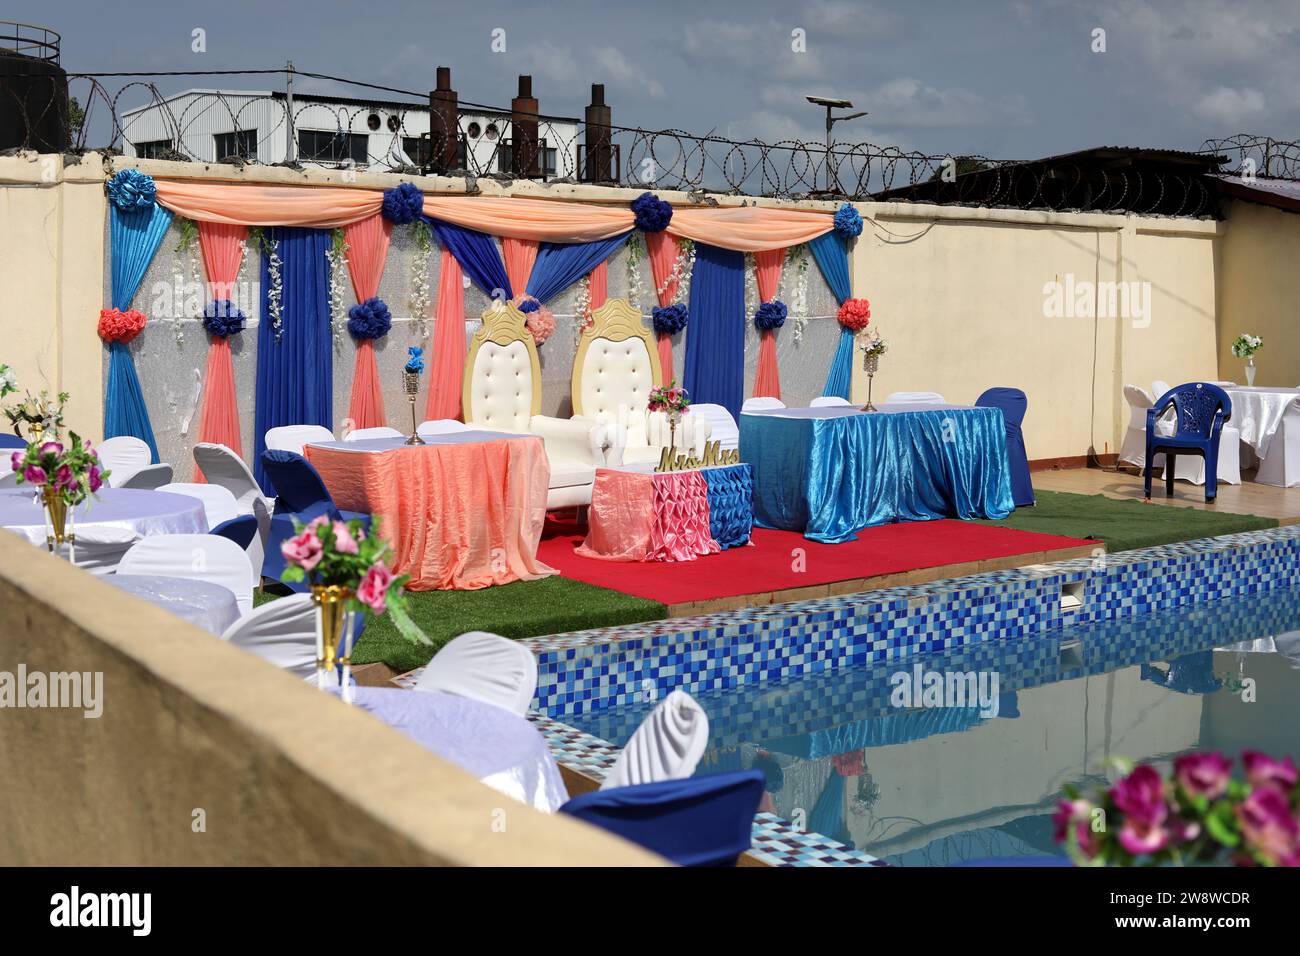 Colourful wedding breakfast party set-up by a pool on a wedding day in Freetown, Sierra Leone, Africa. Stock Photo